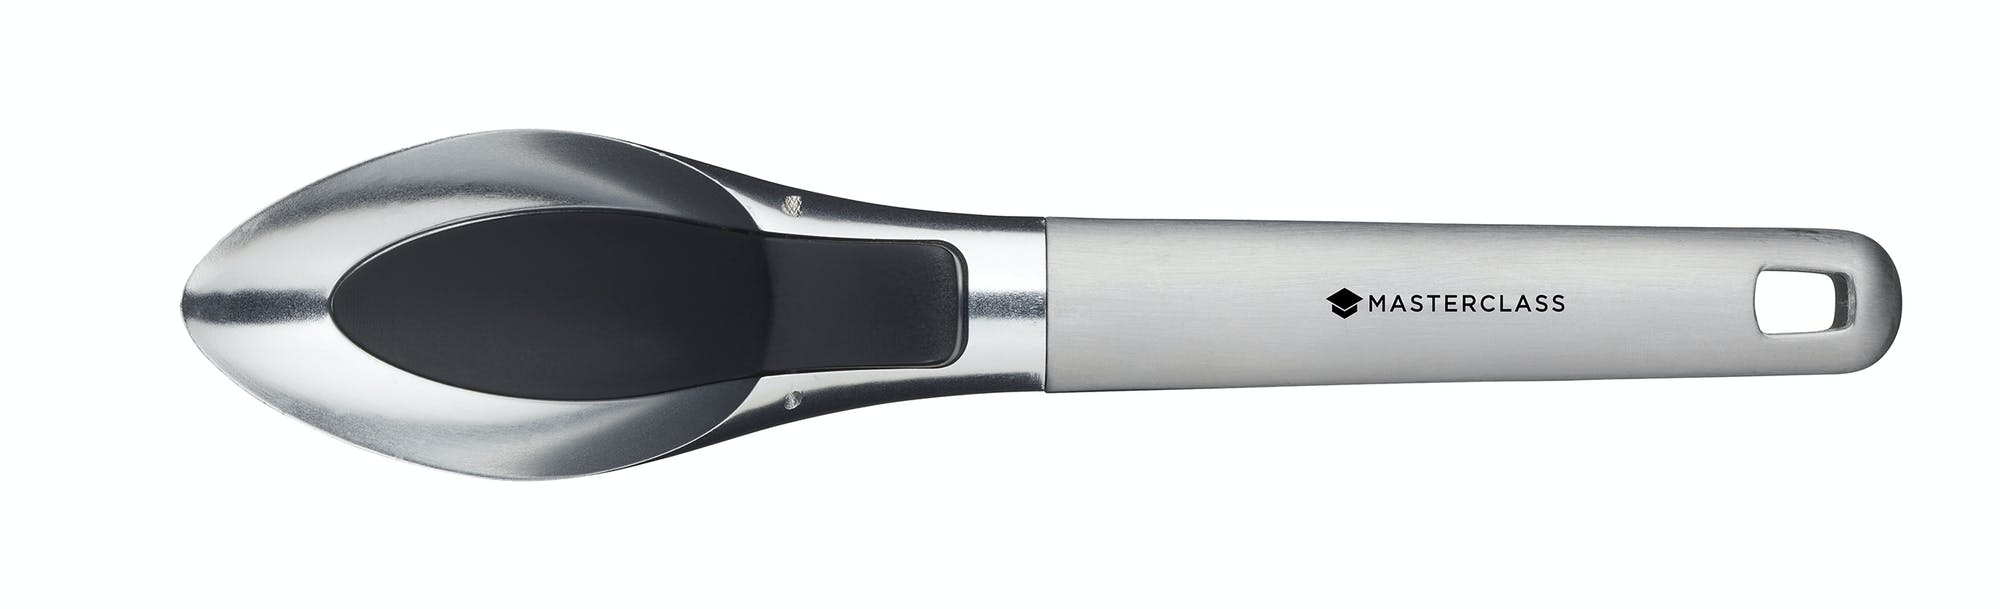 MasterClass Stainless Steel Easy Release Ice Cream Scoop - The Cooks Cupboard Ltd